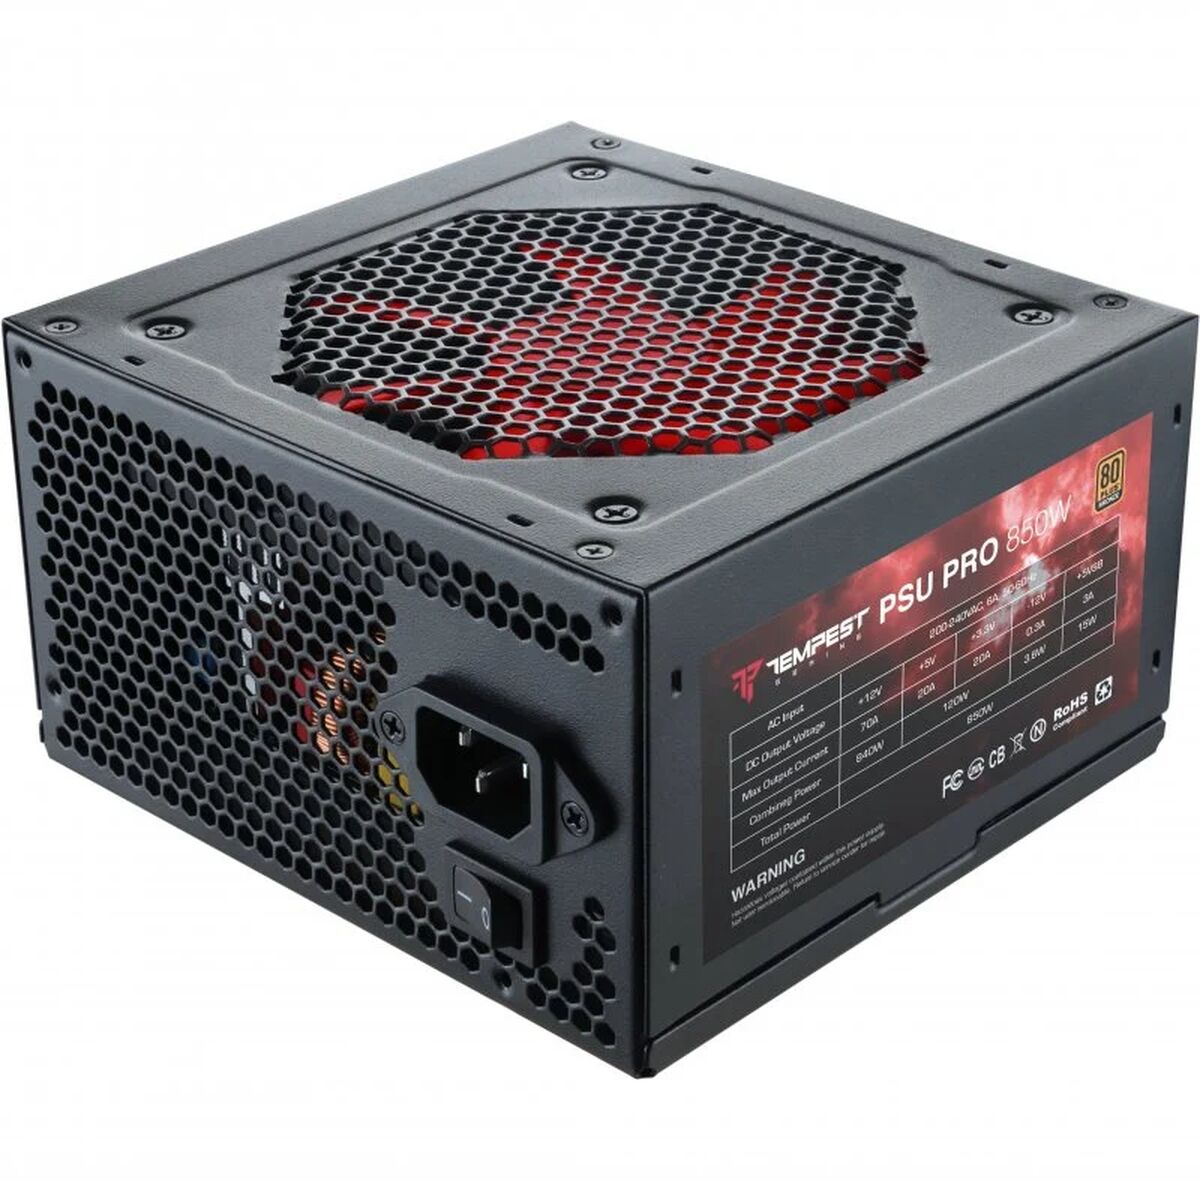 Gaming Power Supply Tempest PSU PRO 850W, Tempest, Computing, Components, gaming-power-supply-tempest-psu-pro-850w, :850W, Brand_Tempest, category-reference-2609, category-reference-2803, category-reference-2816, category-reference-t-19685, category-reference-t-19912, category-reference-t-21360, computers / components, Condition_NEW, ferretería, Price_200 - 300, Teleworking, RiotNook